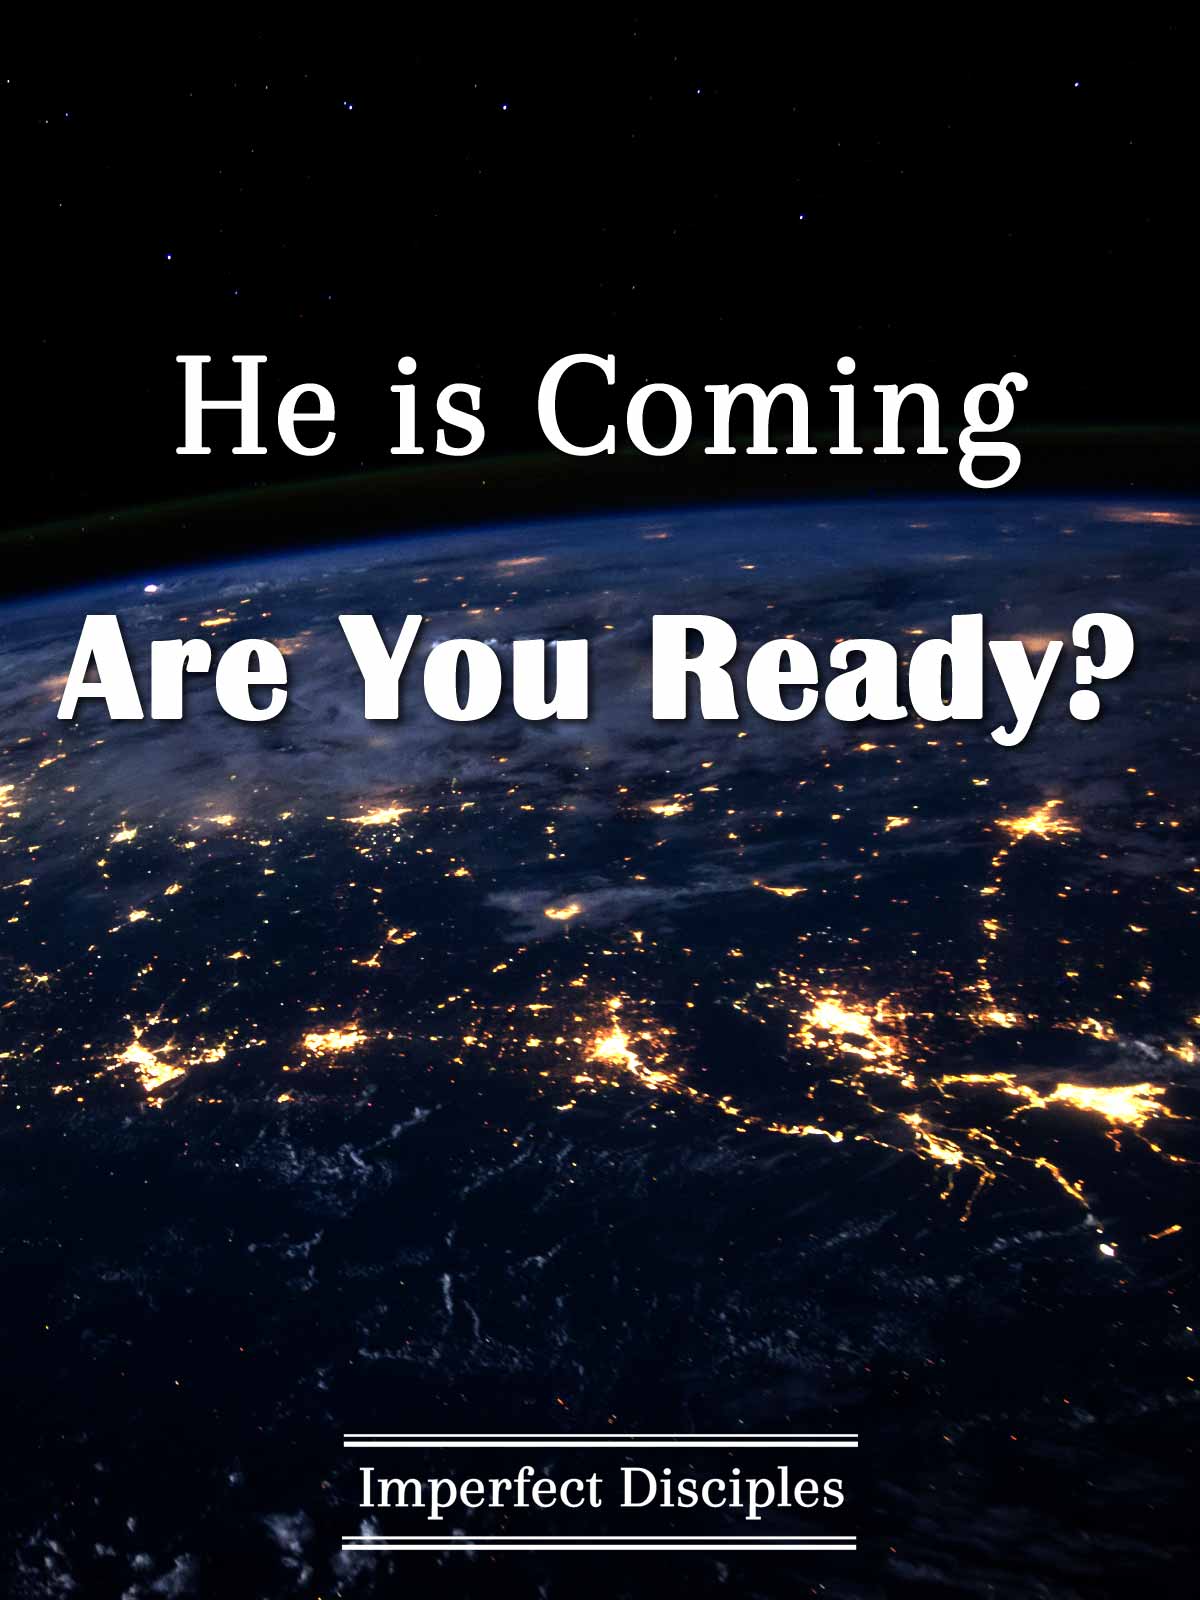 He is Coming. Are you Ready?